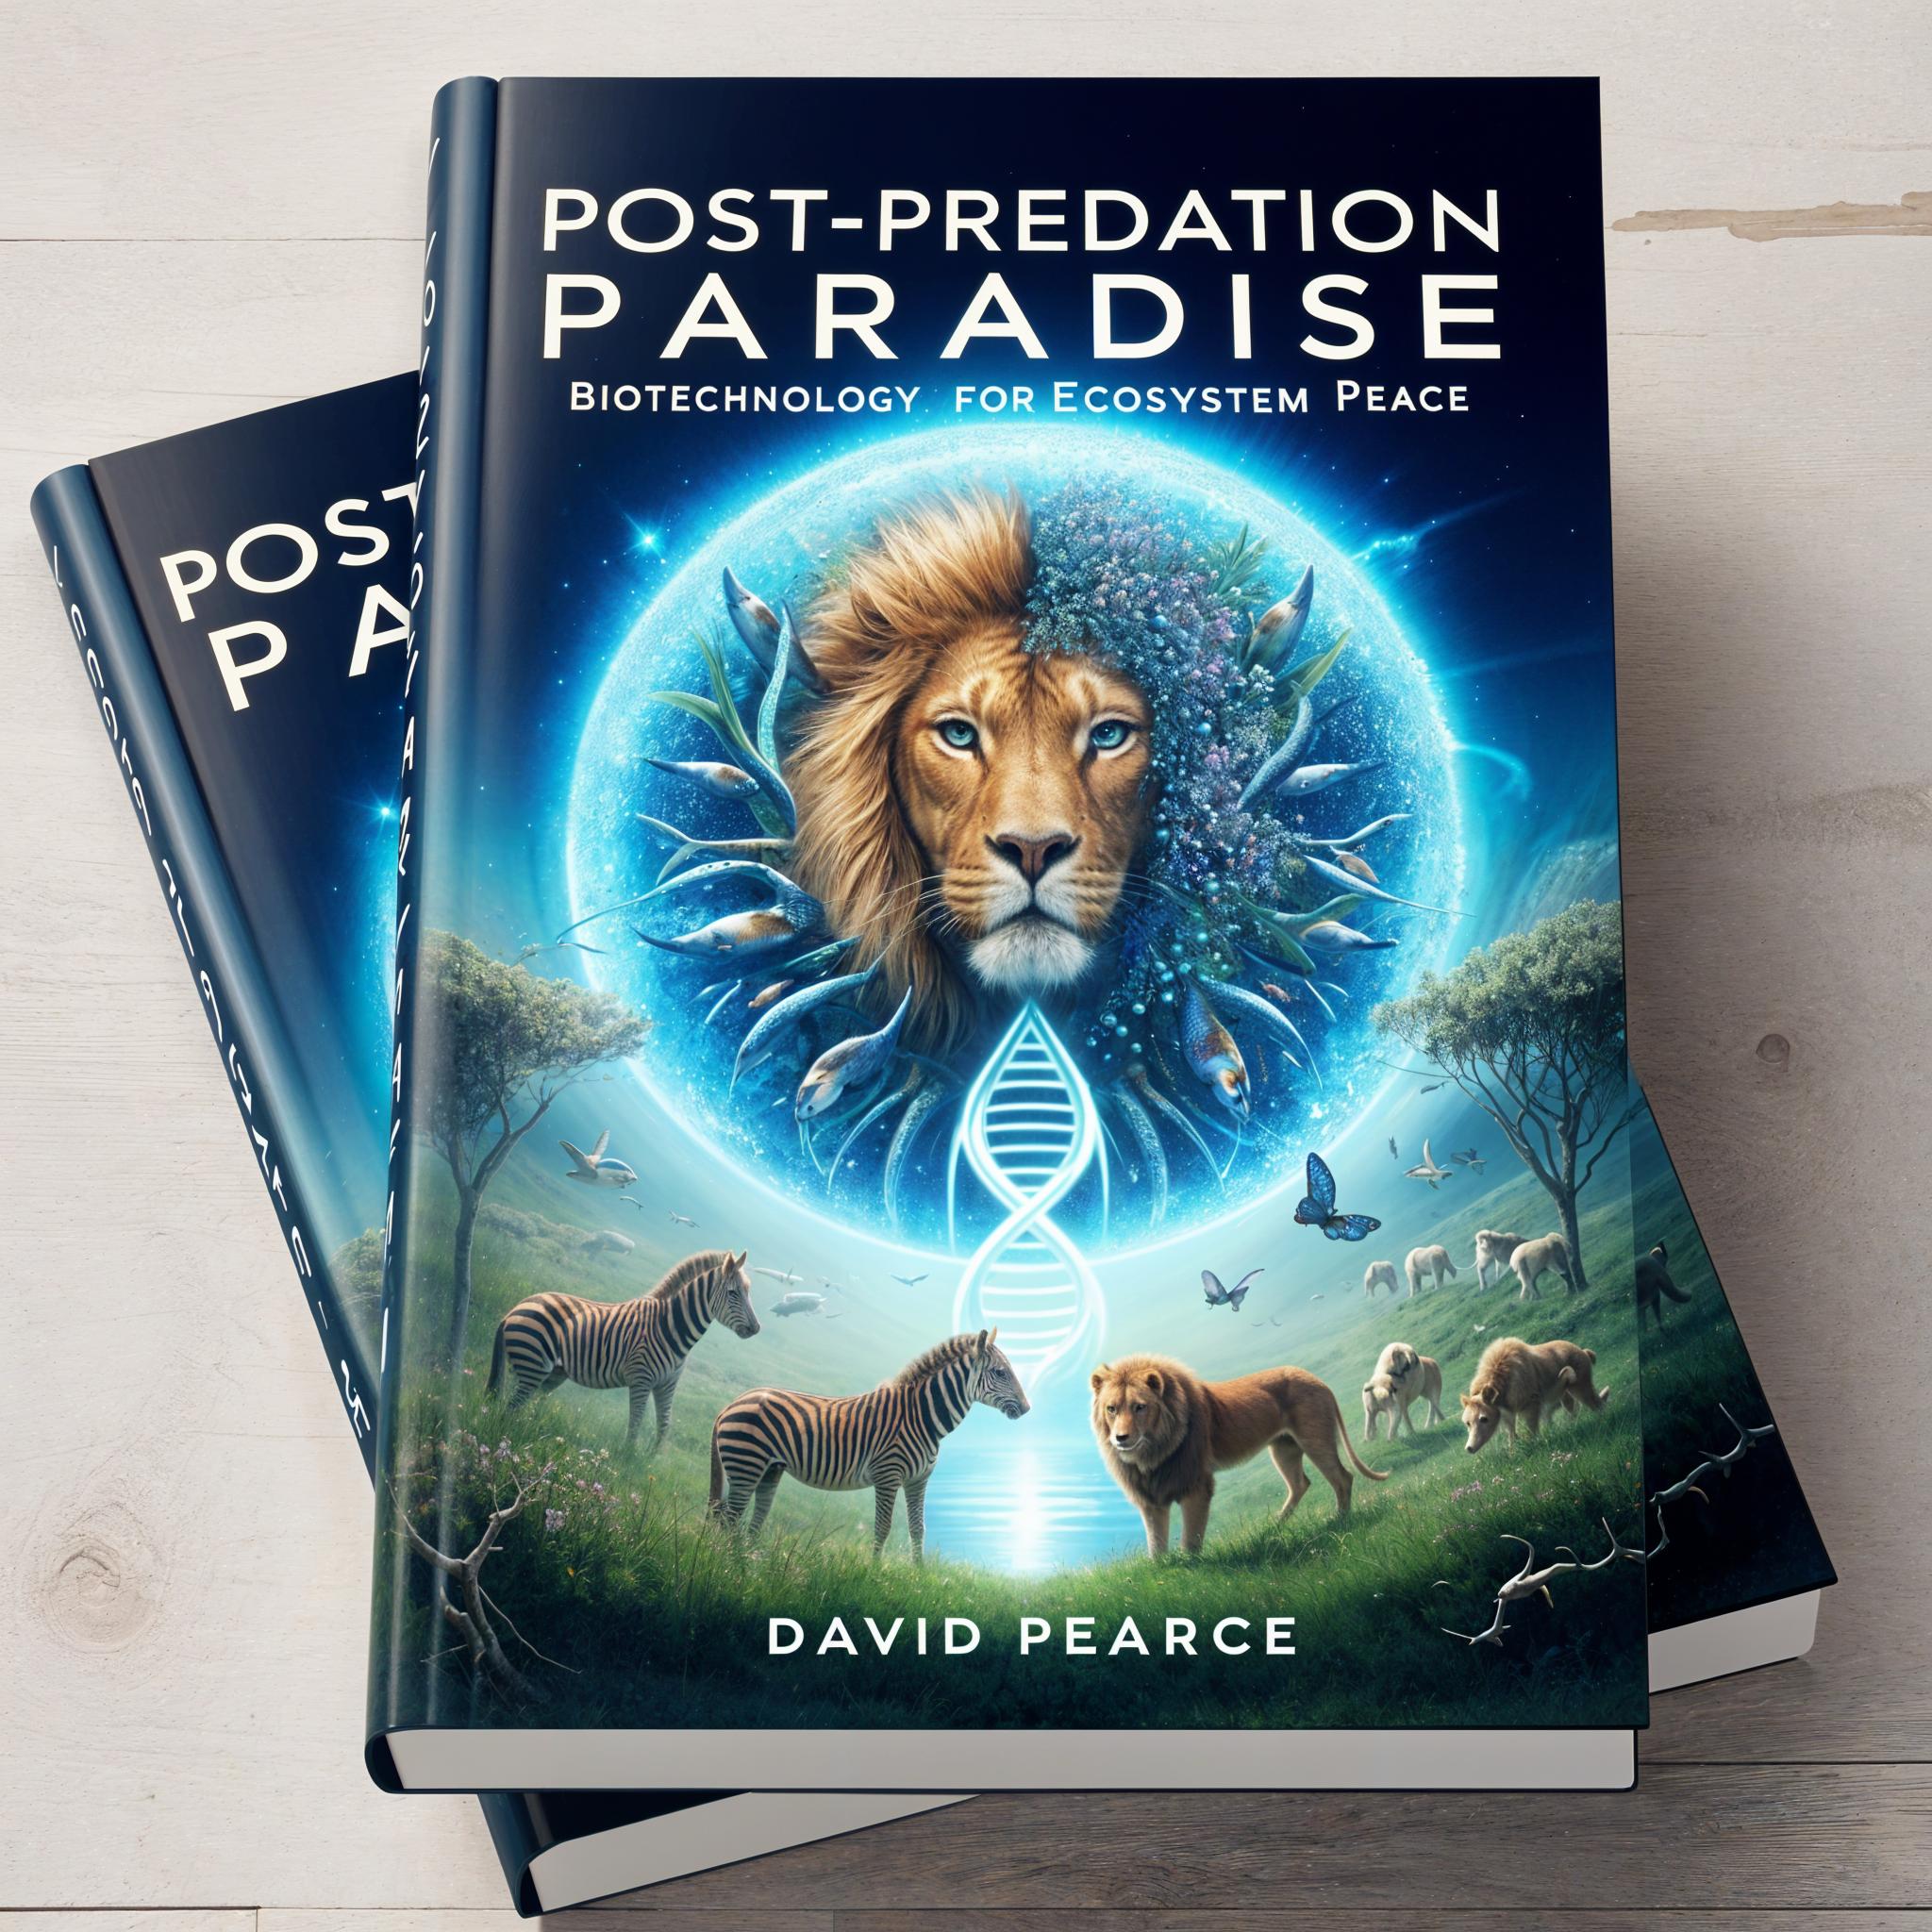 Post-Predation Paradise: Biotechnology for Ecosystem Peace by David Pearce